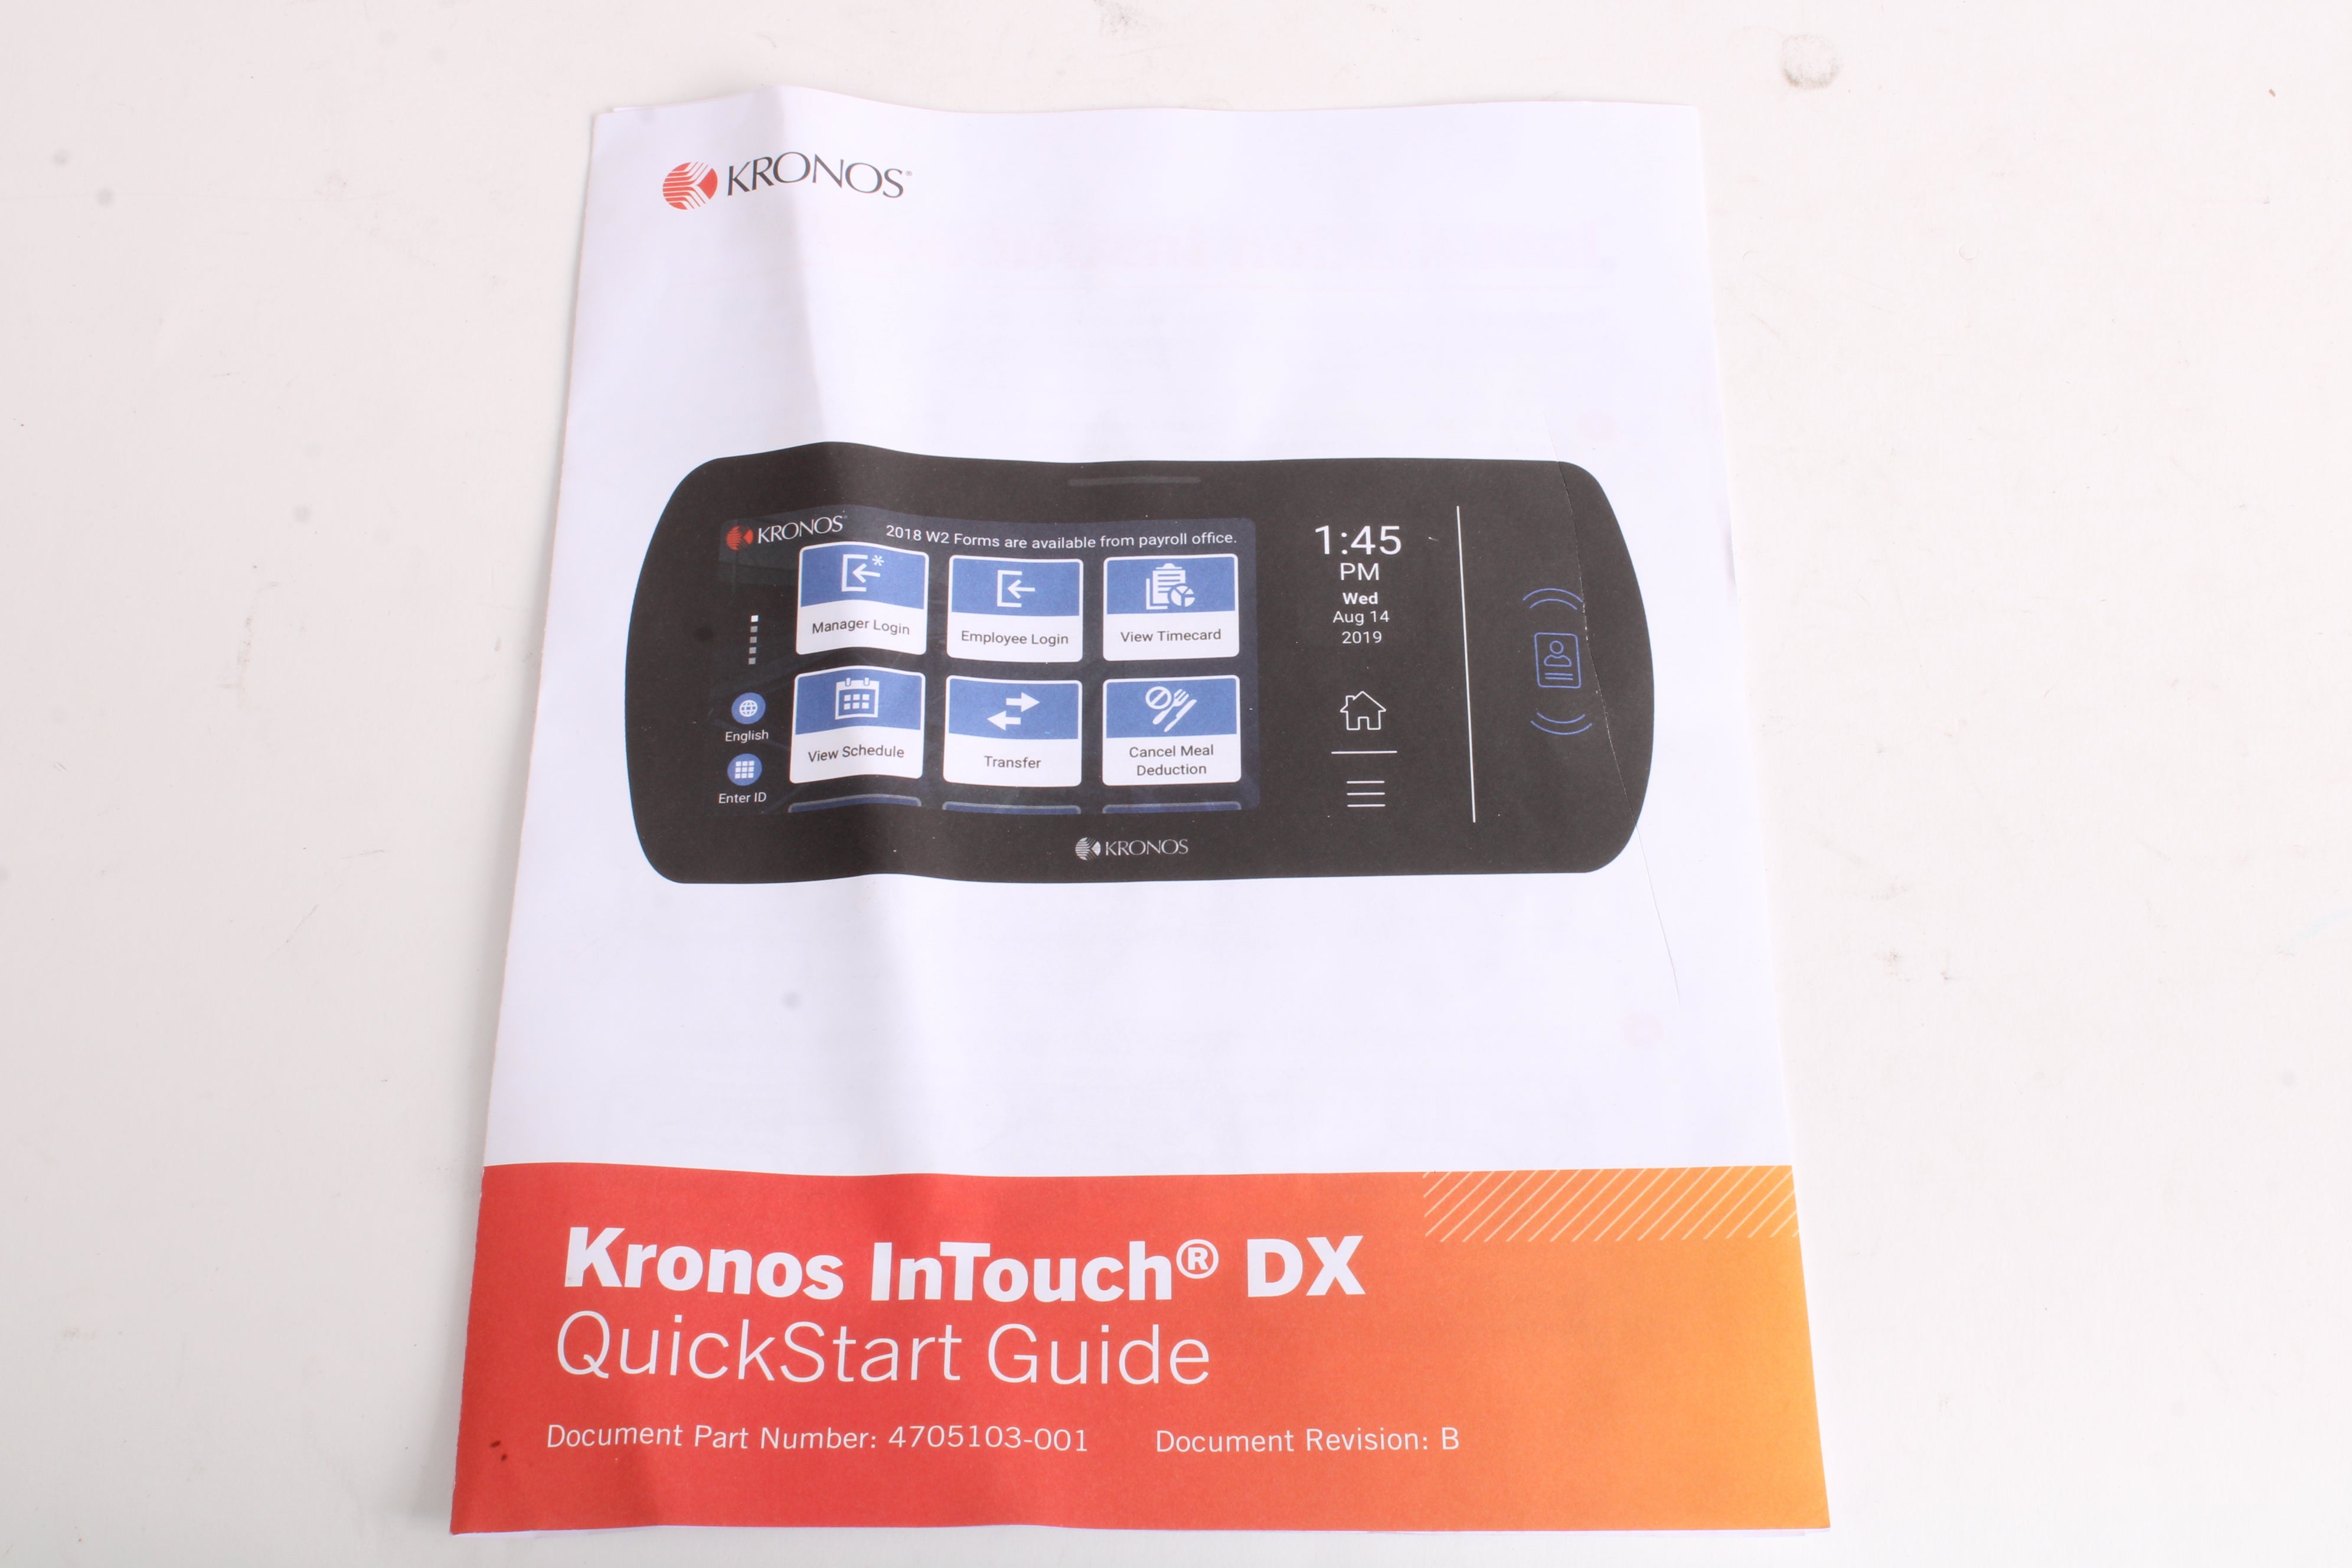 Kronos 8610000-003 InTouch DX with HID Proximity - Workforce Management  Terminal